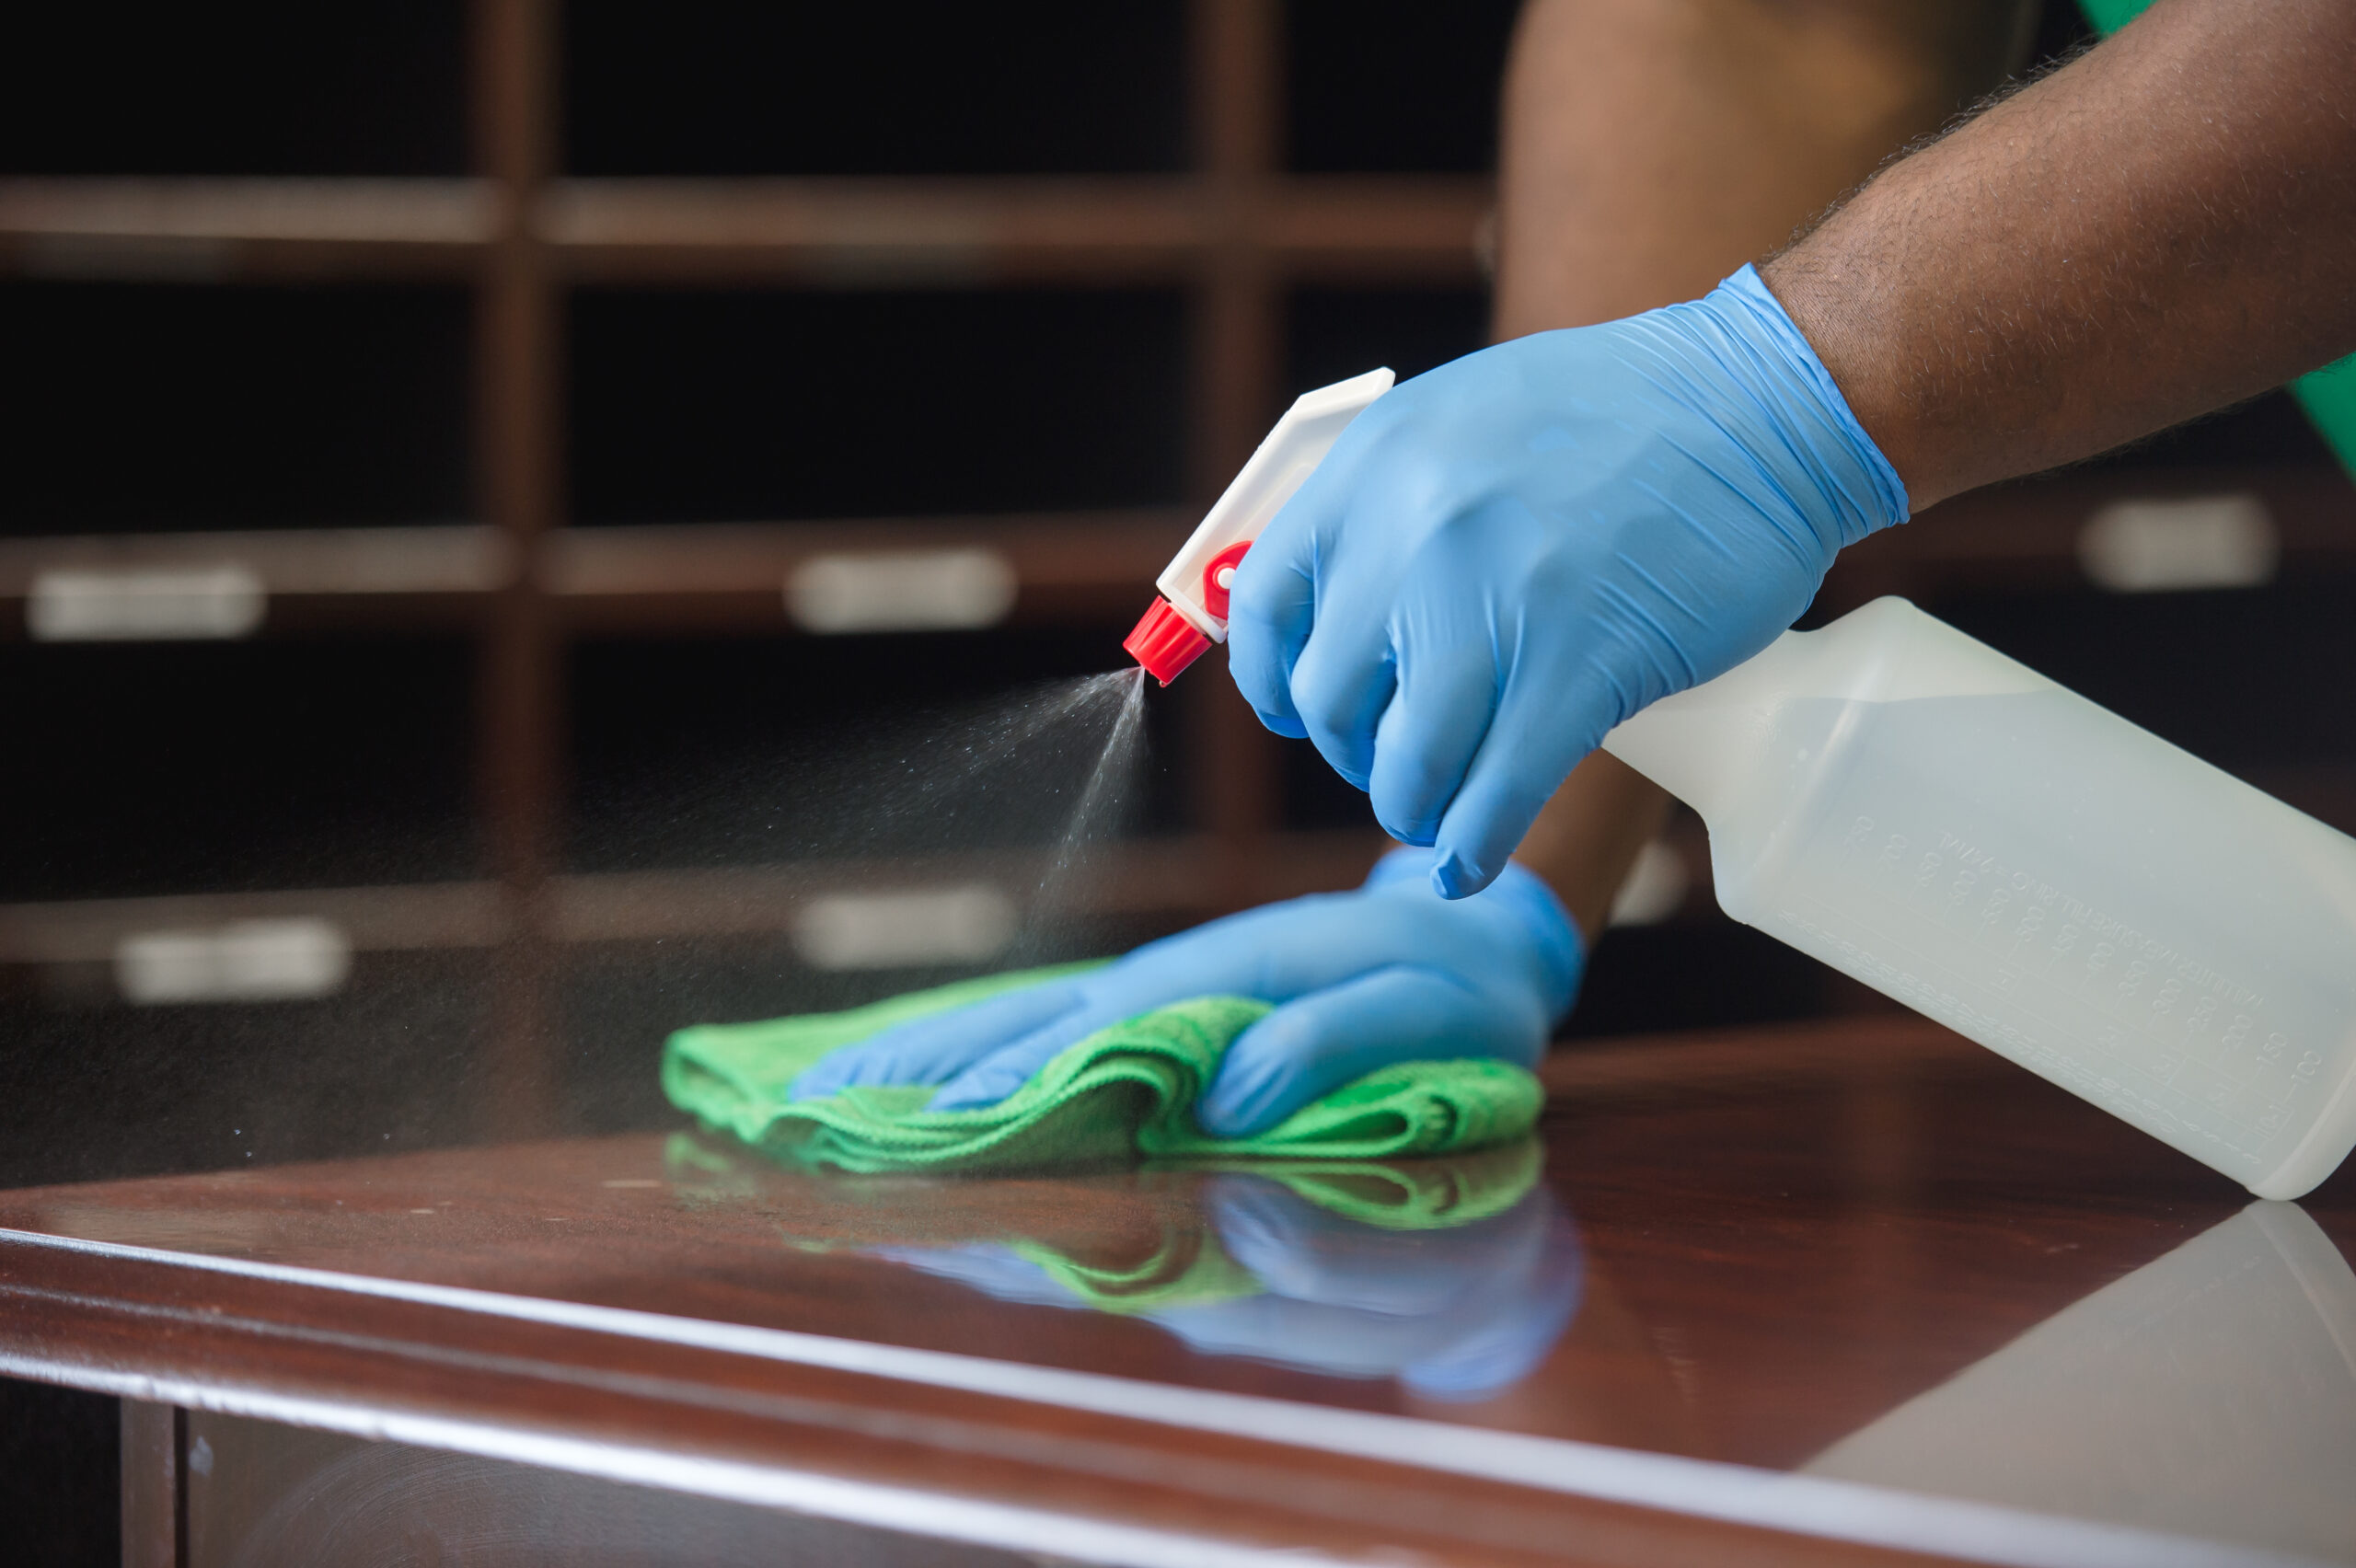 professional cleaning of office desk surface area